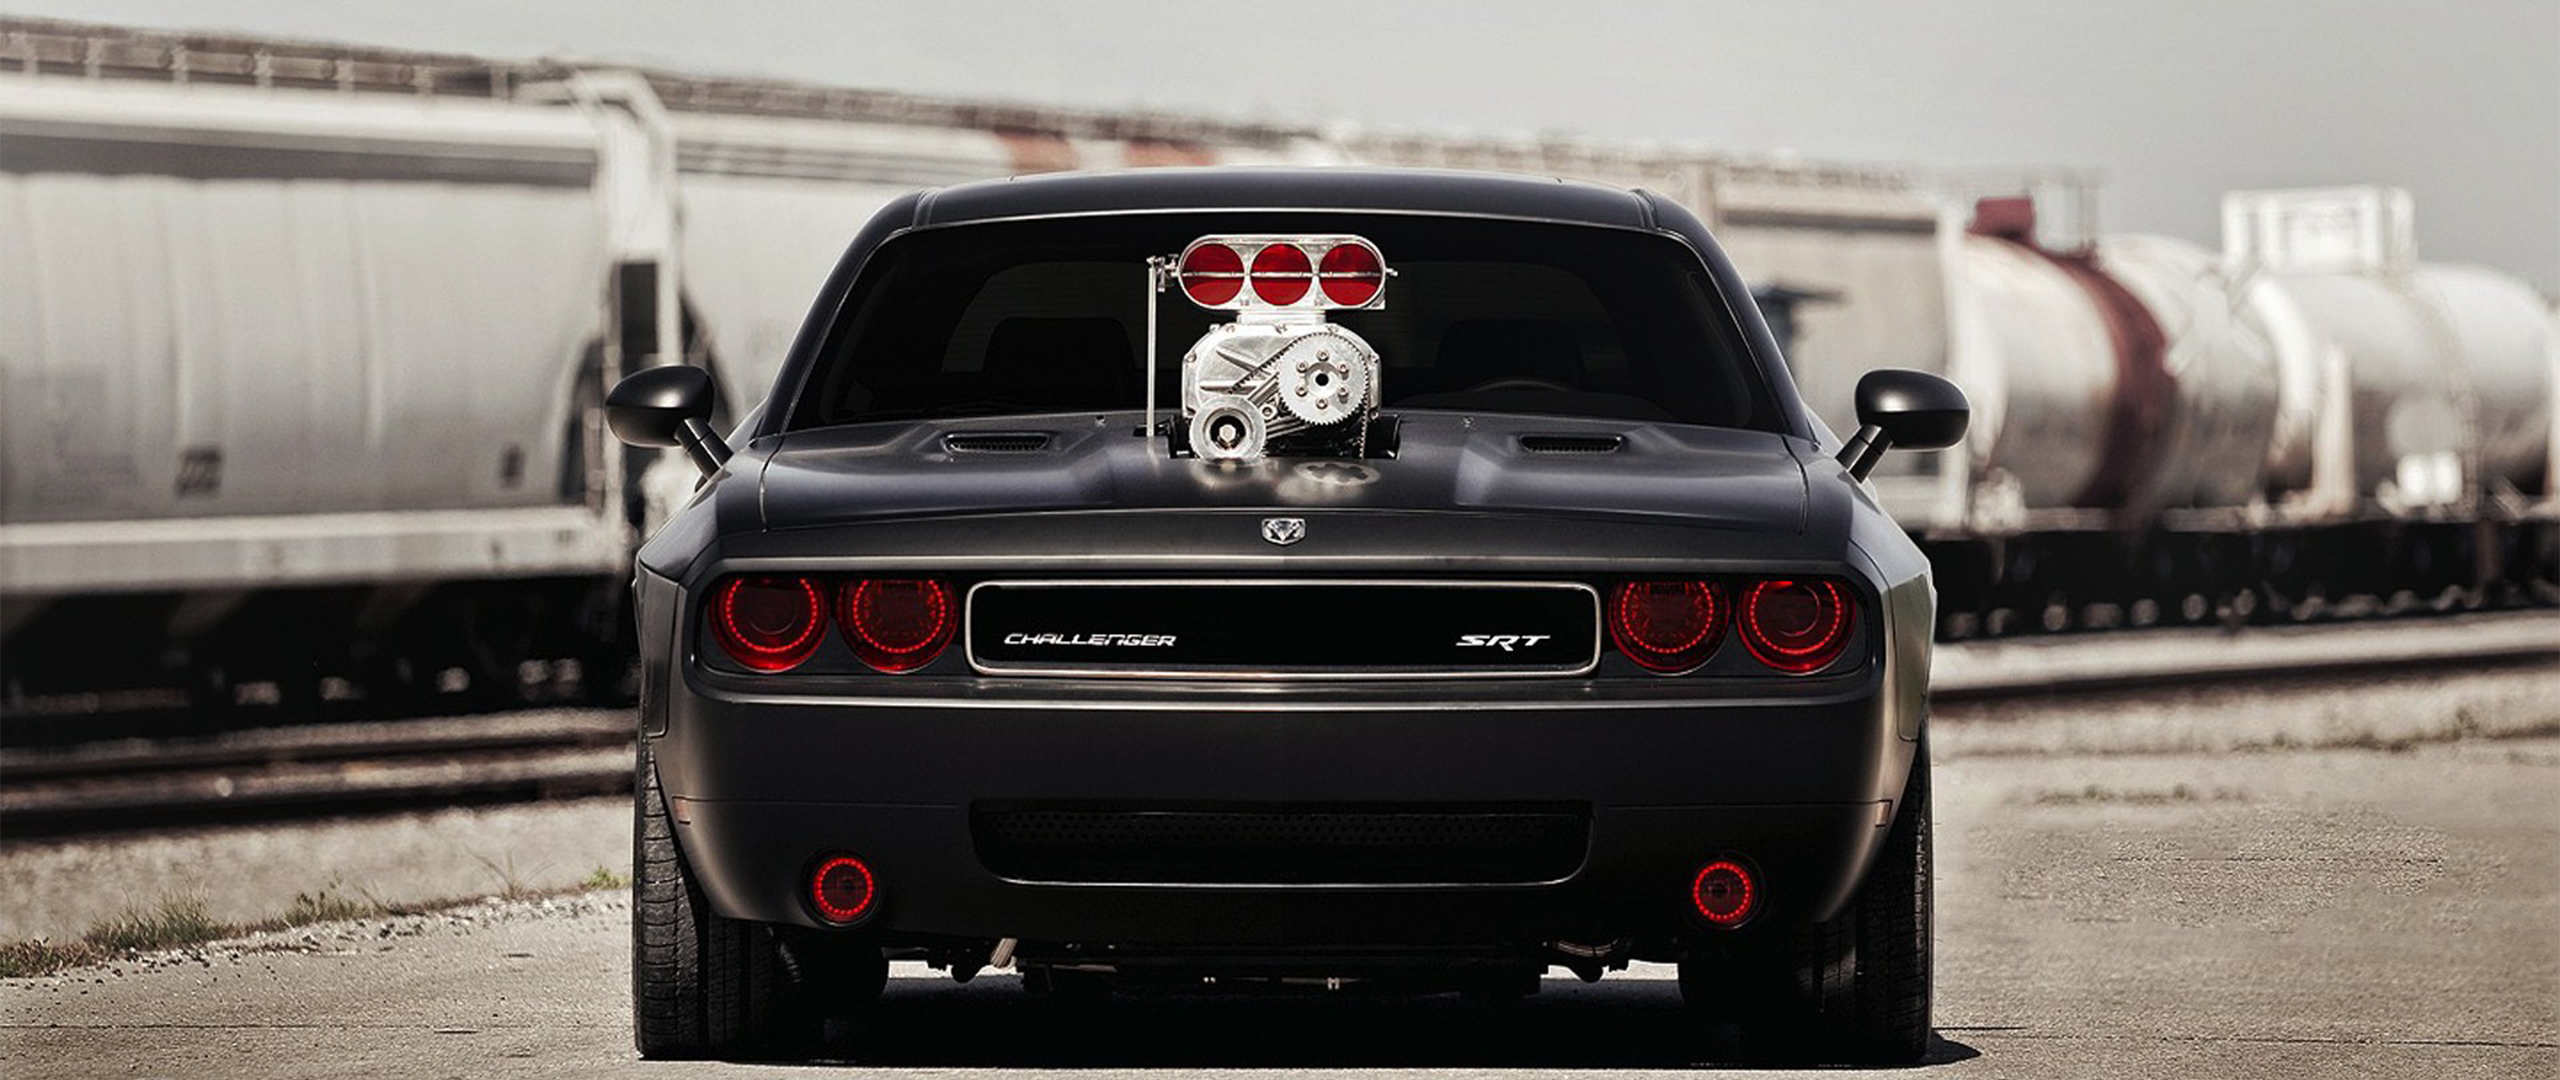 Free photo Dodge Challenger Hellcat with red angel eyes.